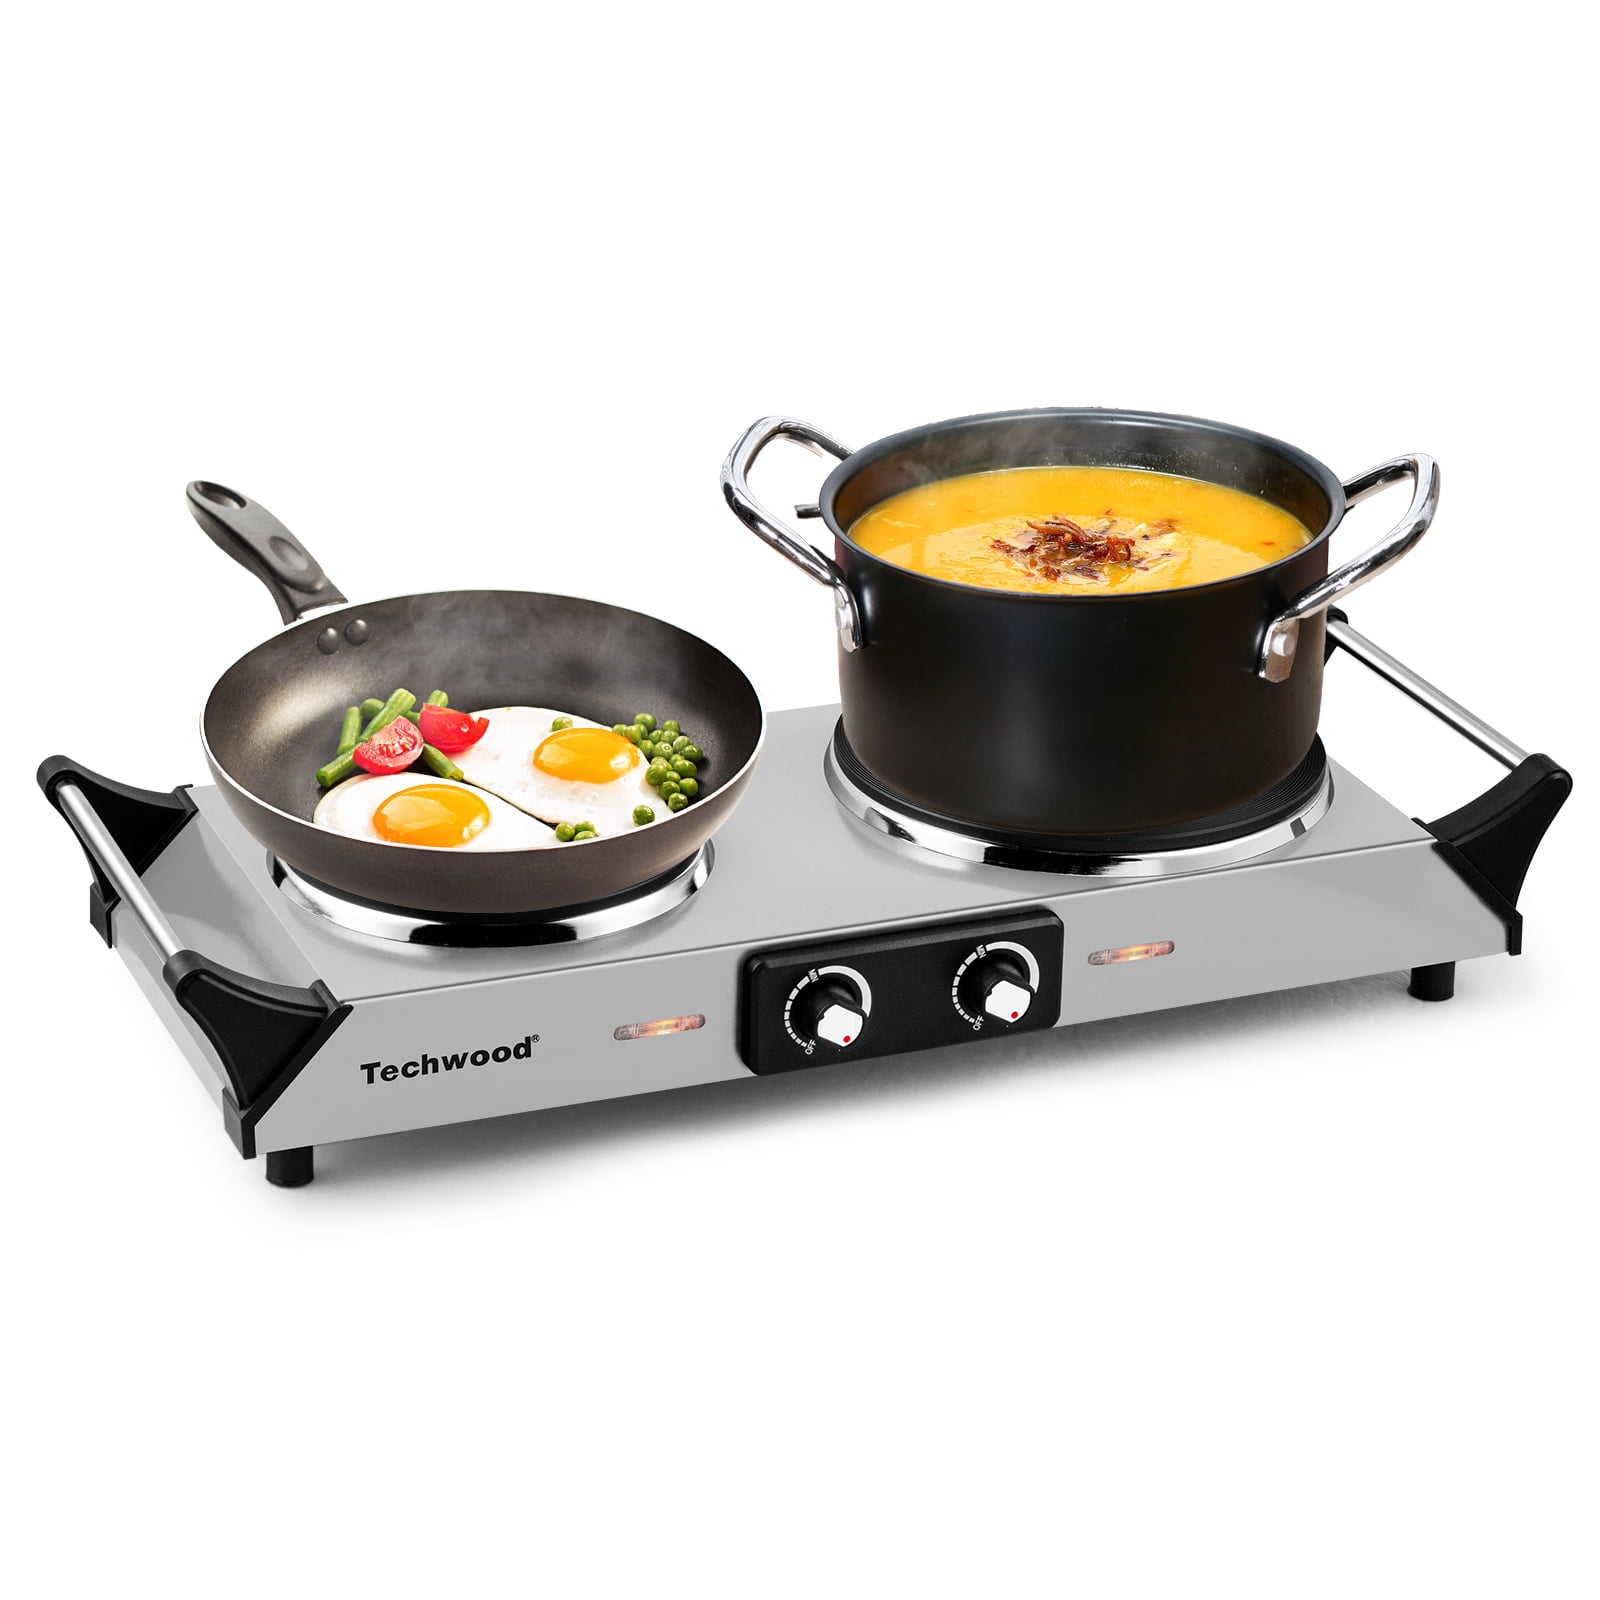 Kitchen Use Dual Hot Plate Cooking Stove 2000W Powerful Portable Elect –  RAF Appliances